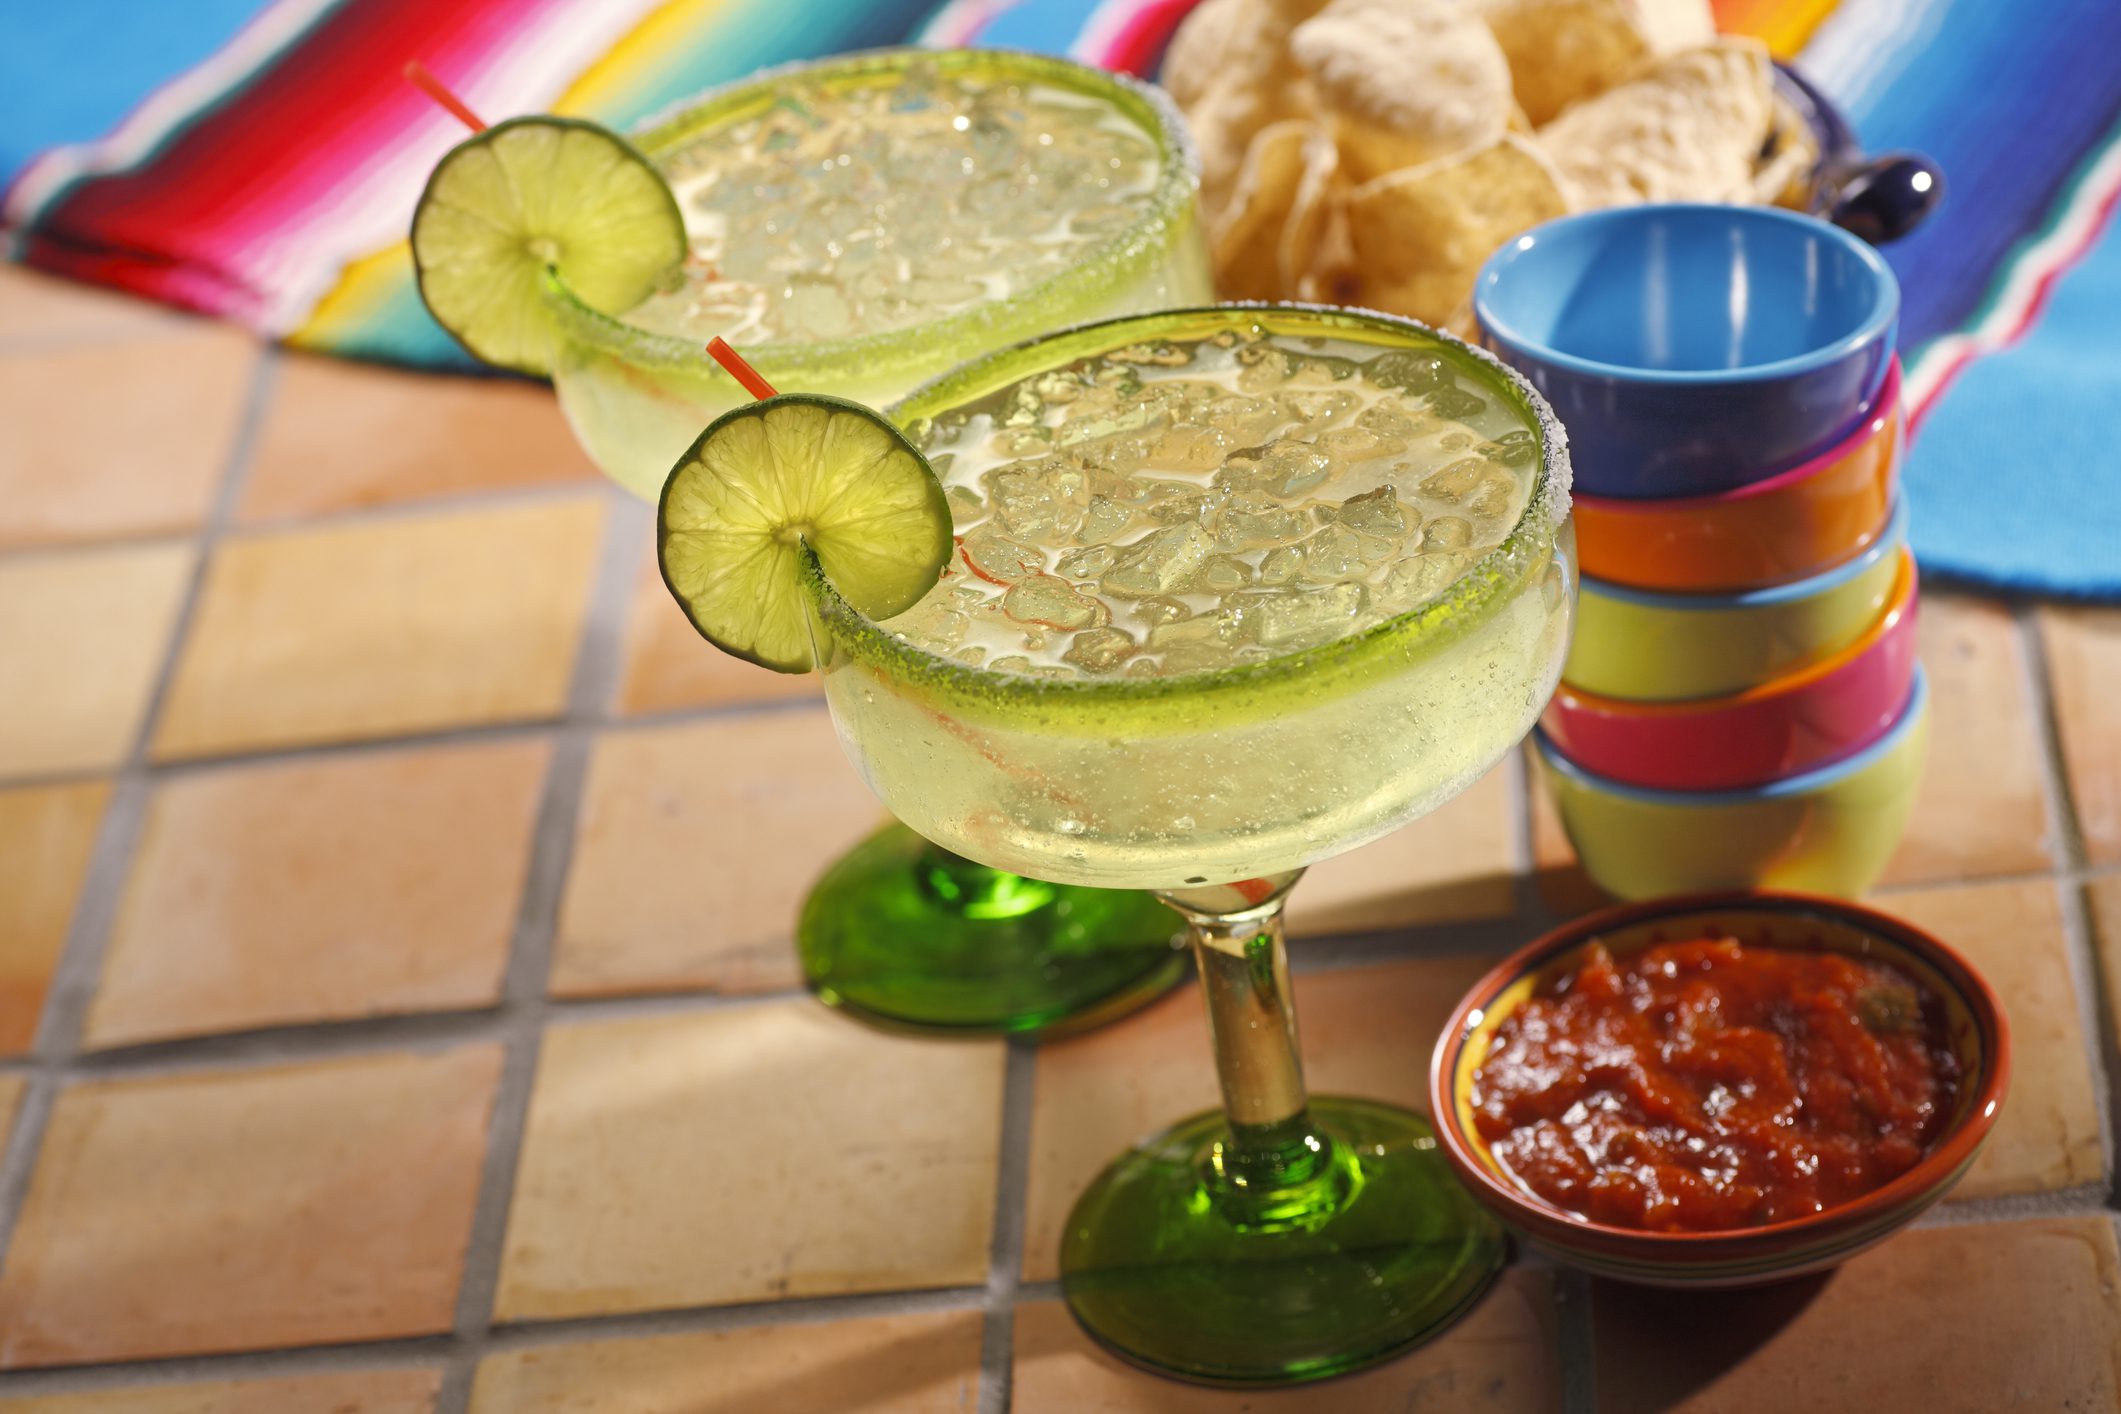 Best Places in DFW to Celebrate National Margarita Day on 2/22 Dallas